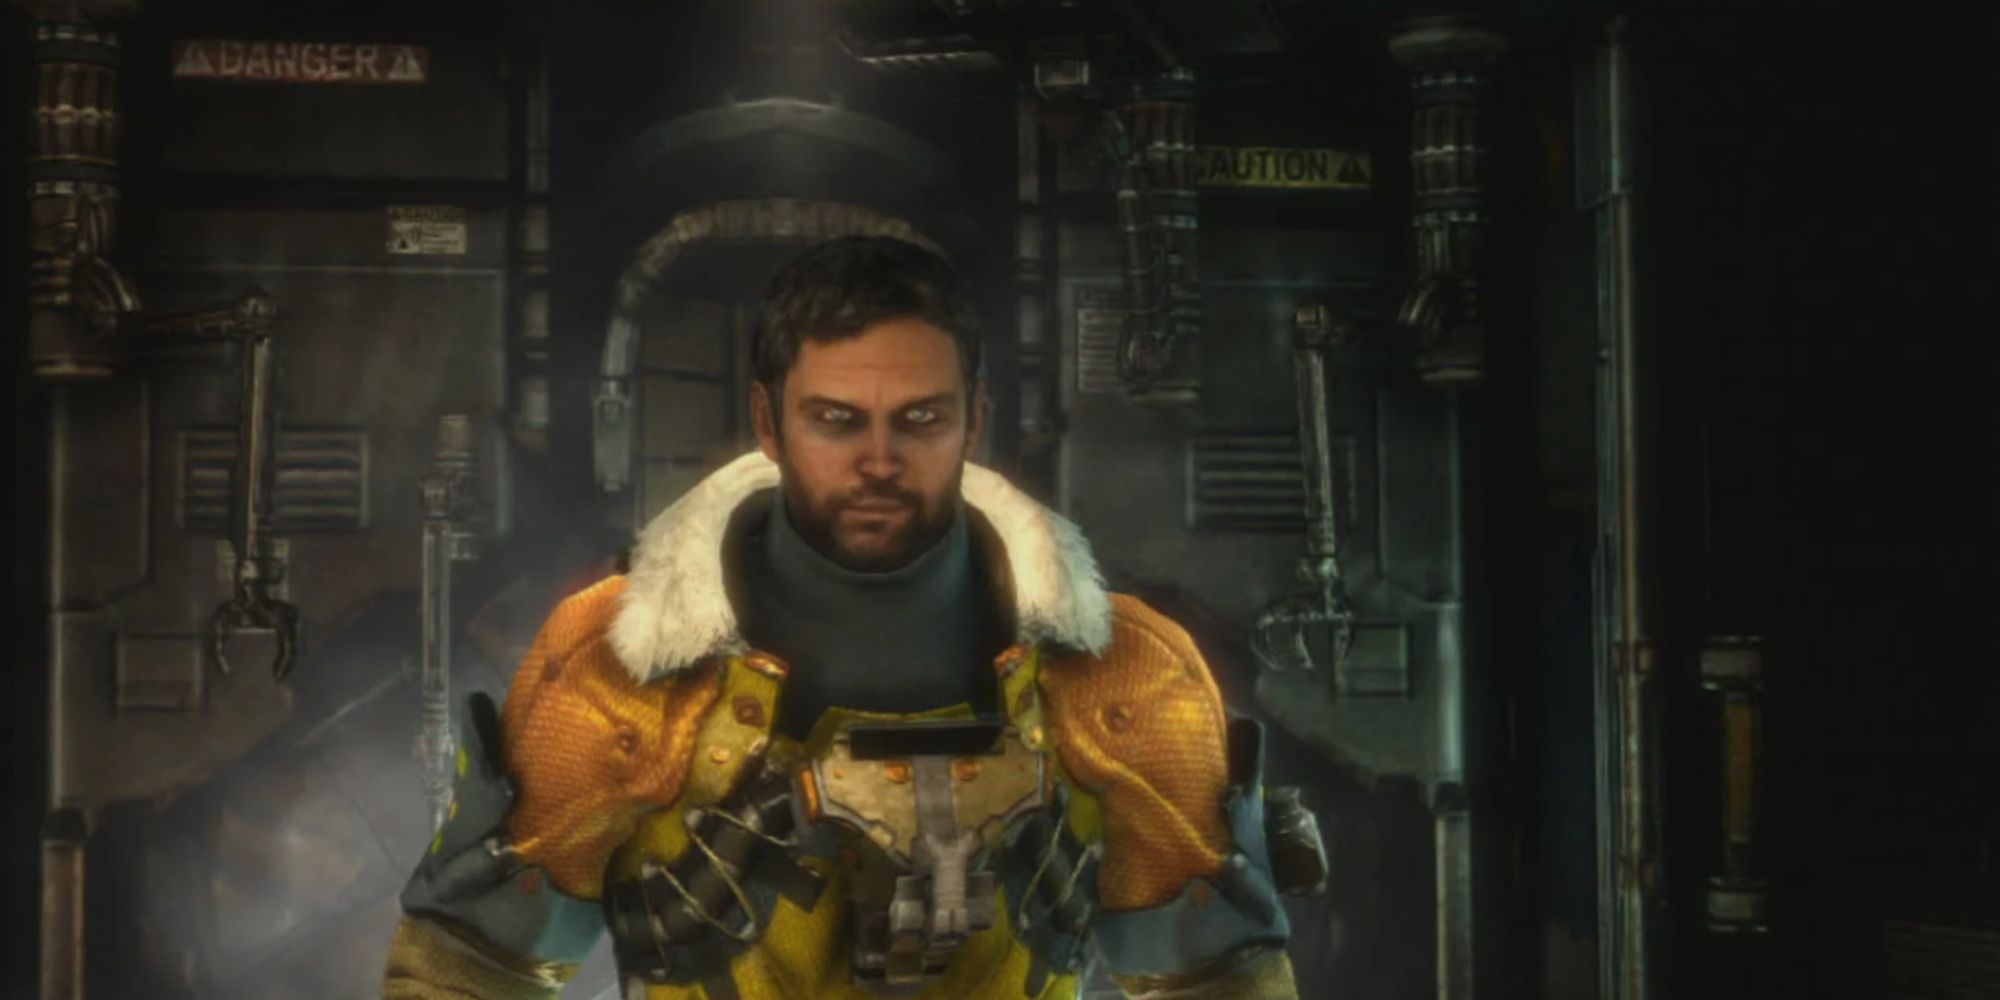 isaac clarke in a rig outfit